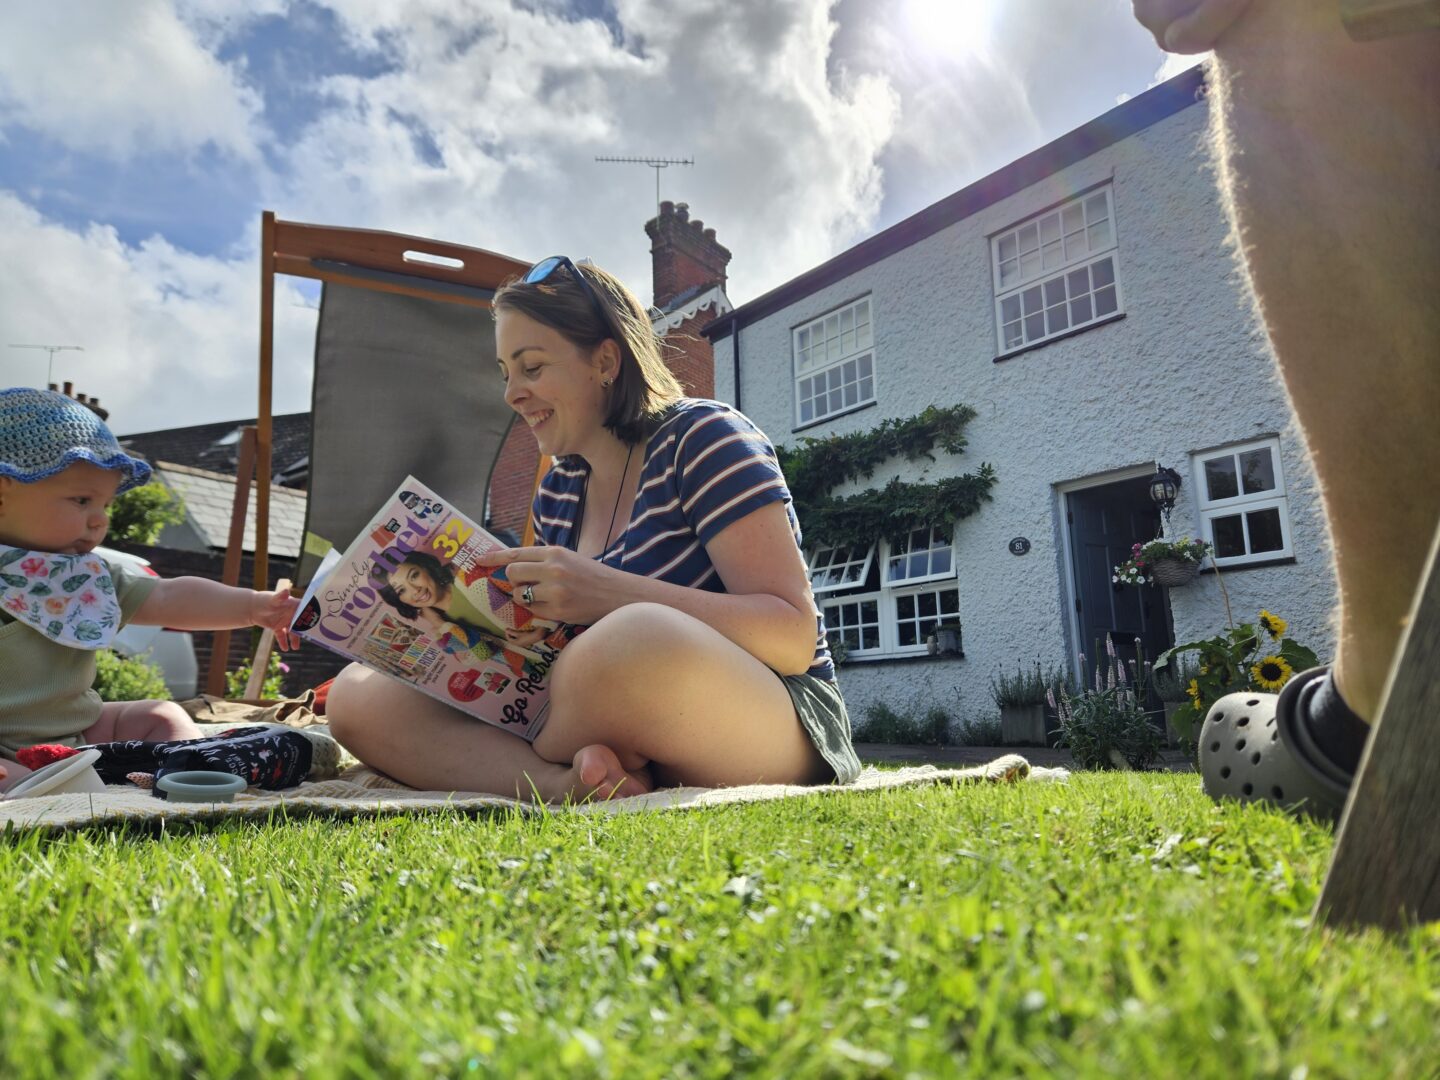 woman in striped top sitting on grass reading crochet magazine, with white cottage behind her